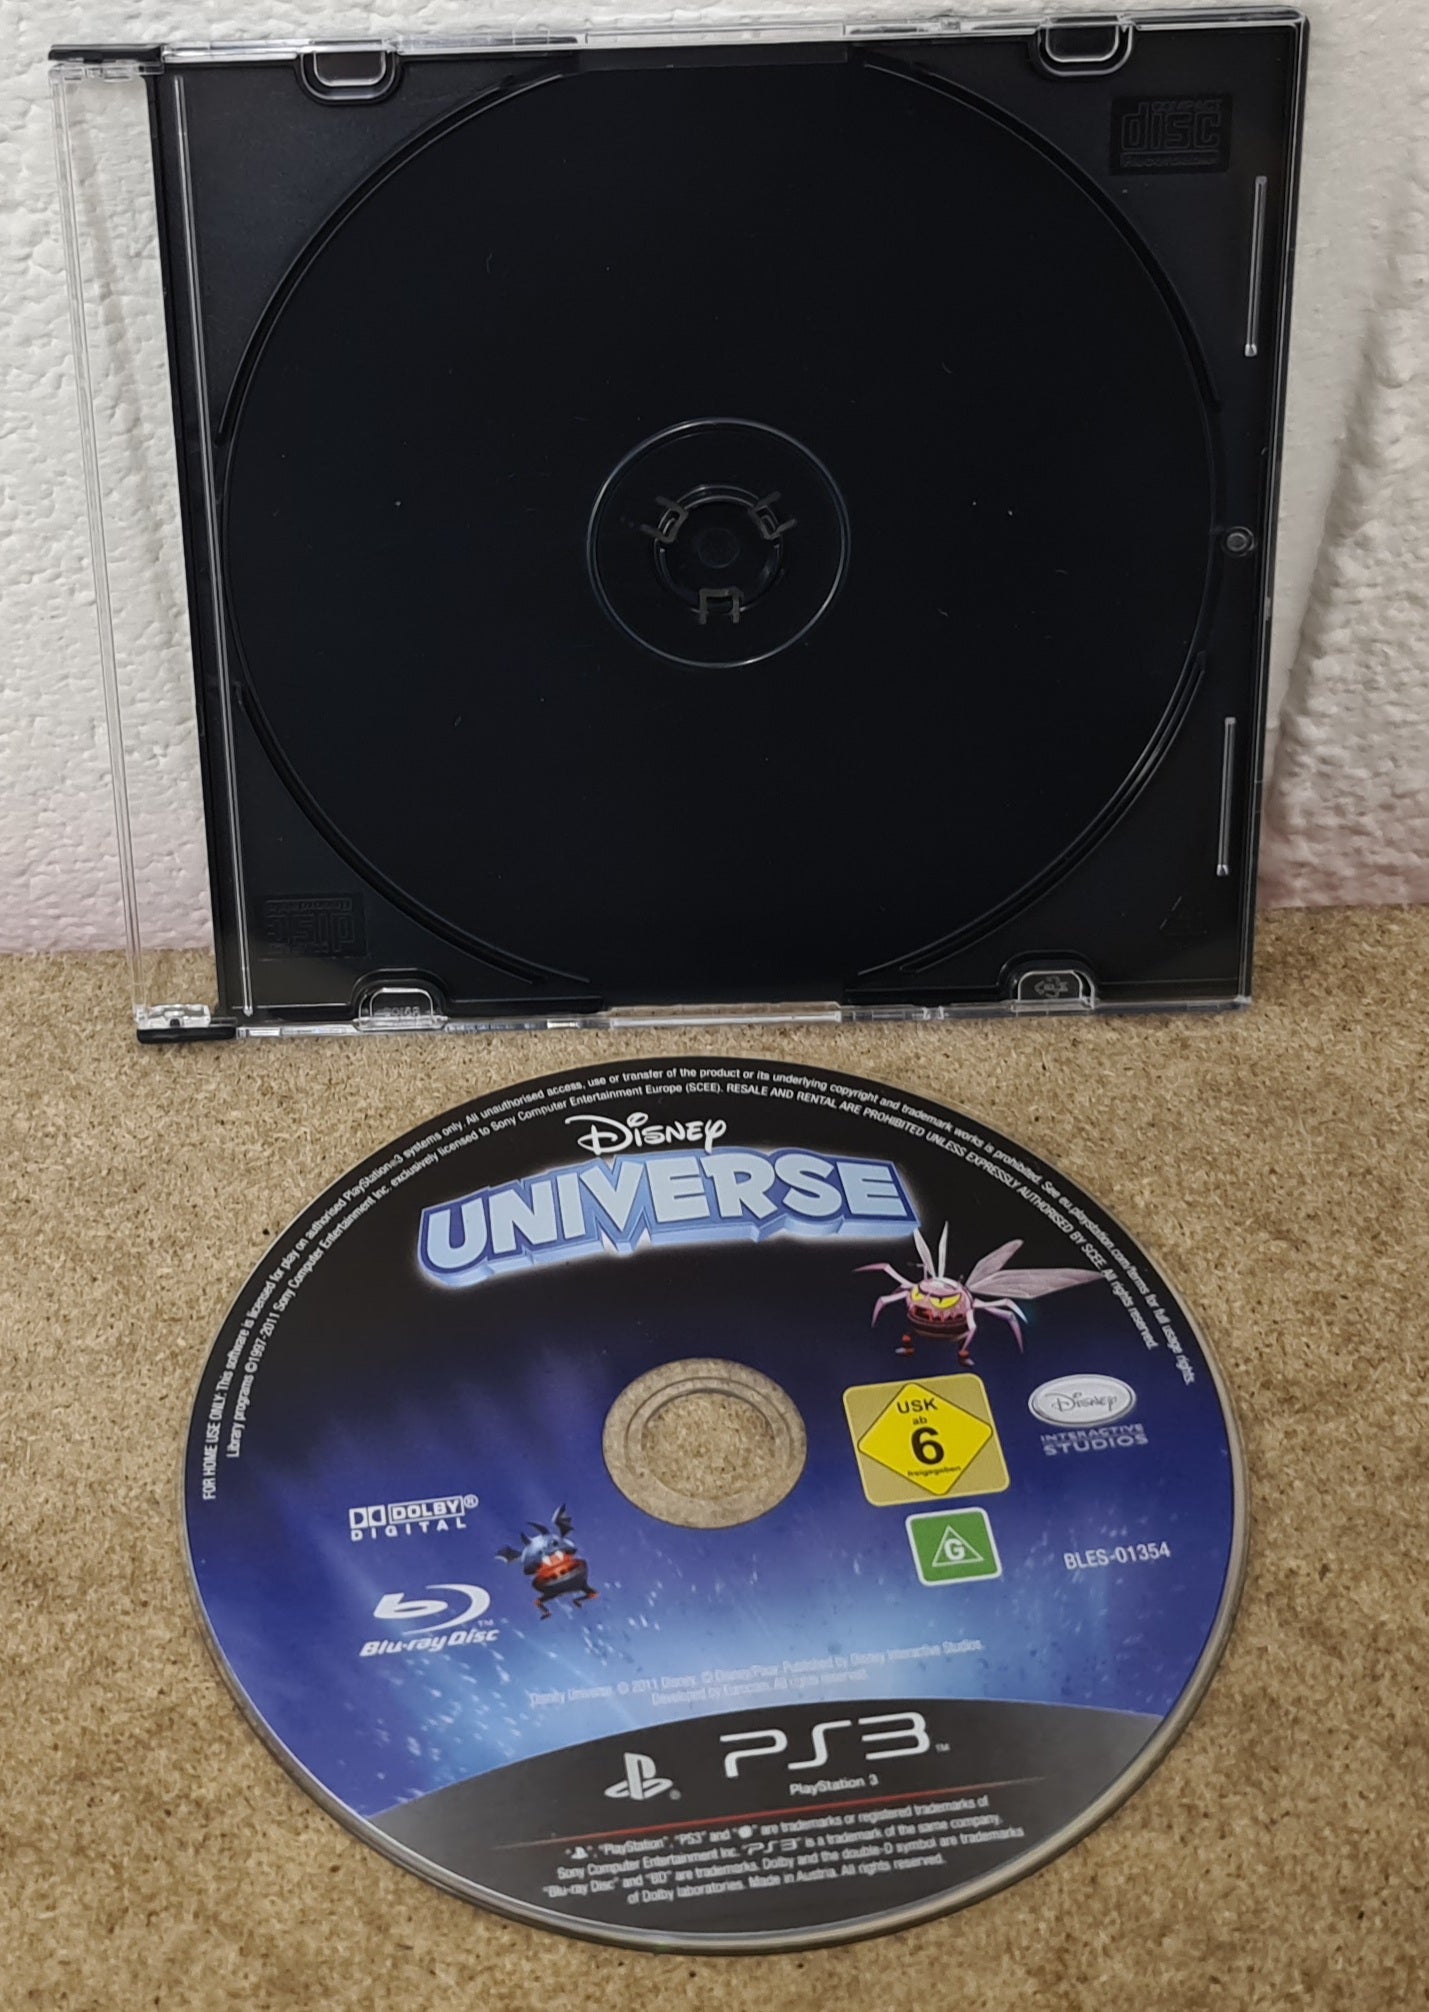 Disney Universe Sony Playstation 3 (PS3) Game Disc Only